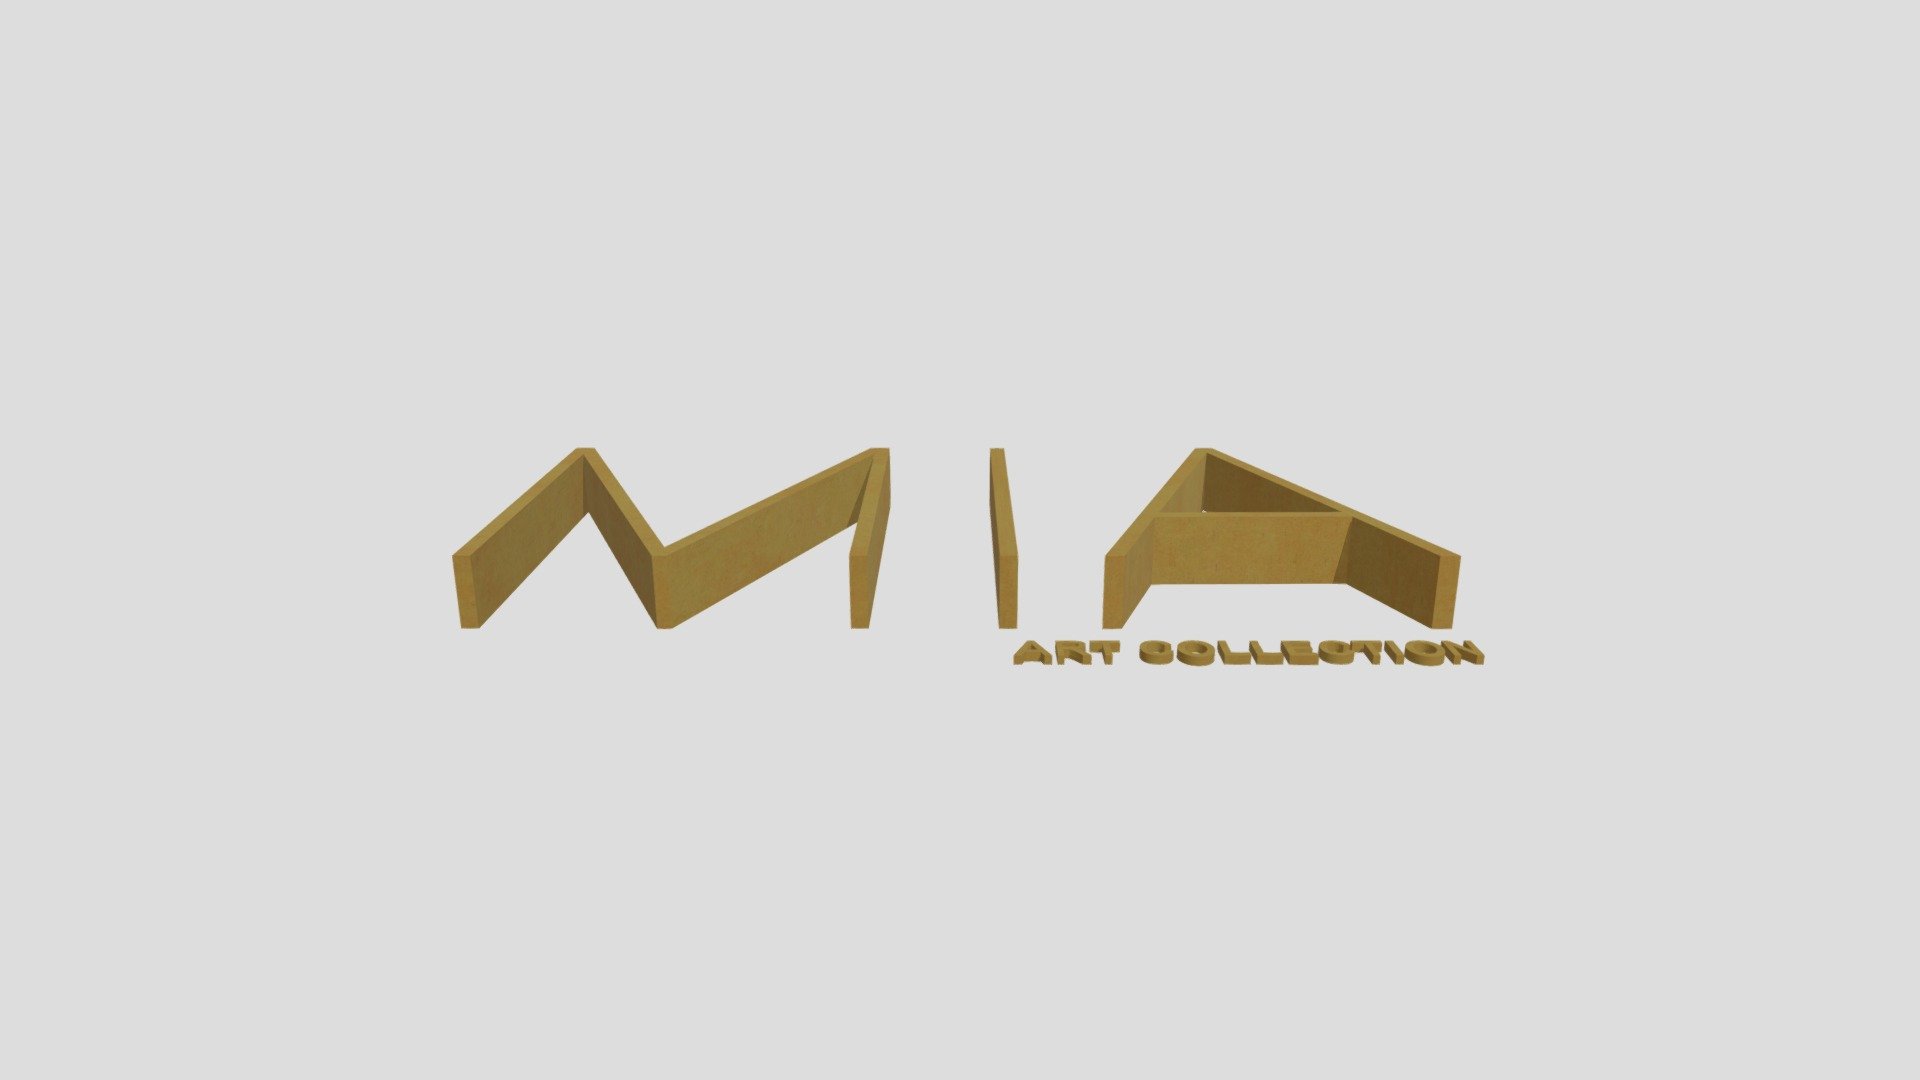 MIA Art Collection Logo in Gold